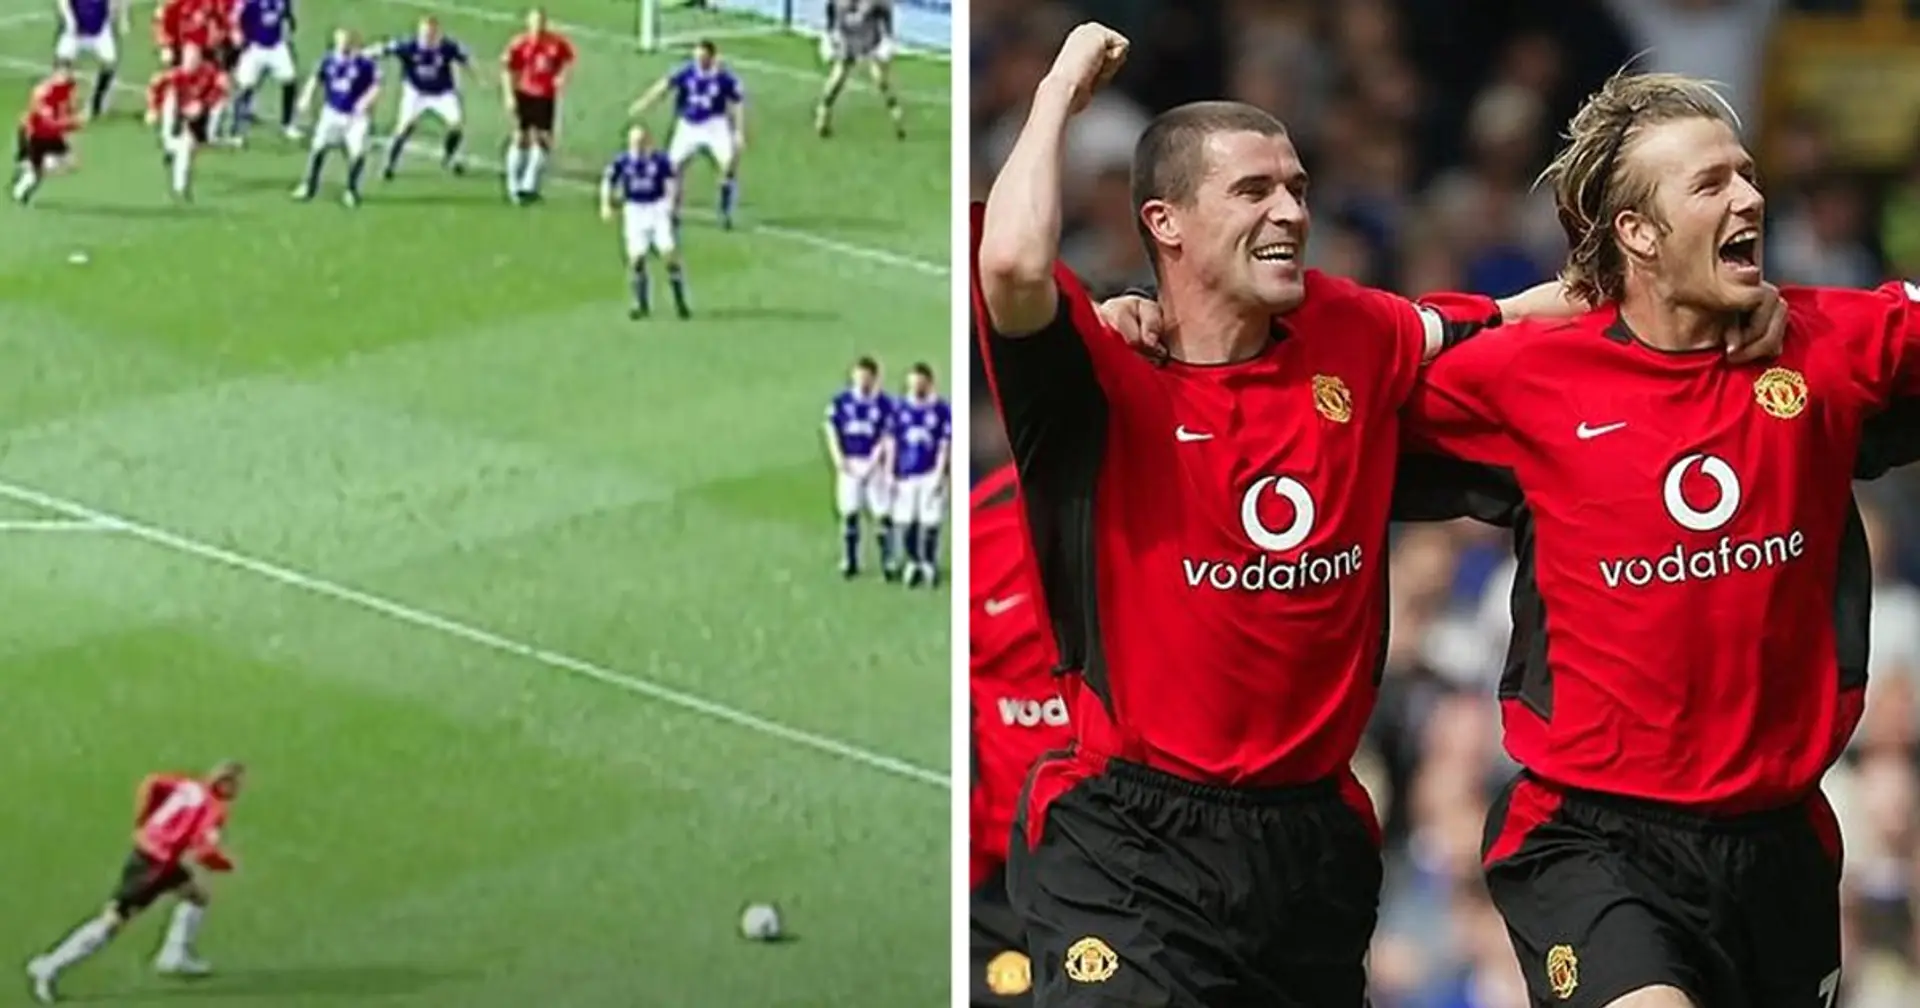 21 years ago, David Beckham scored his last ever Man United goal and it was an absolute screamer